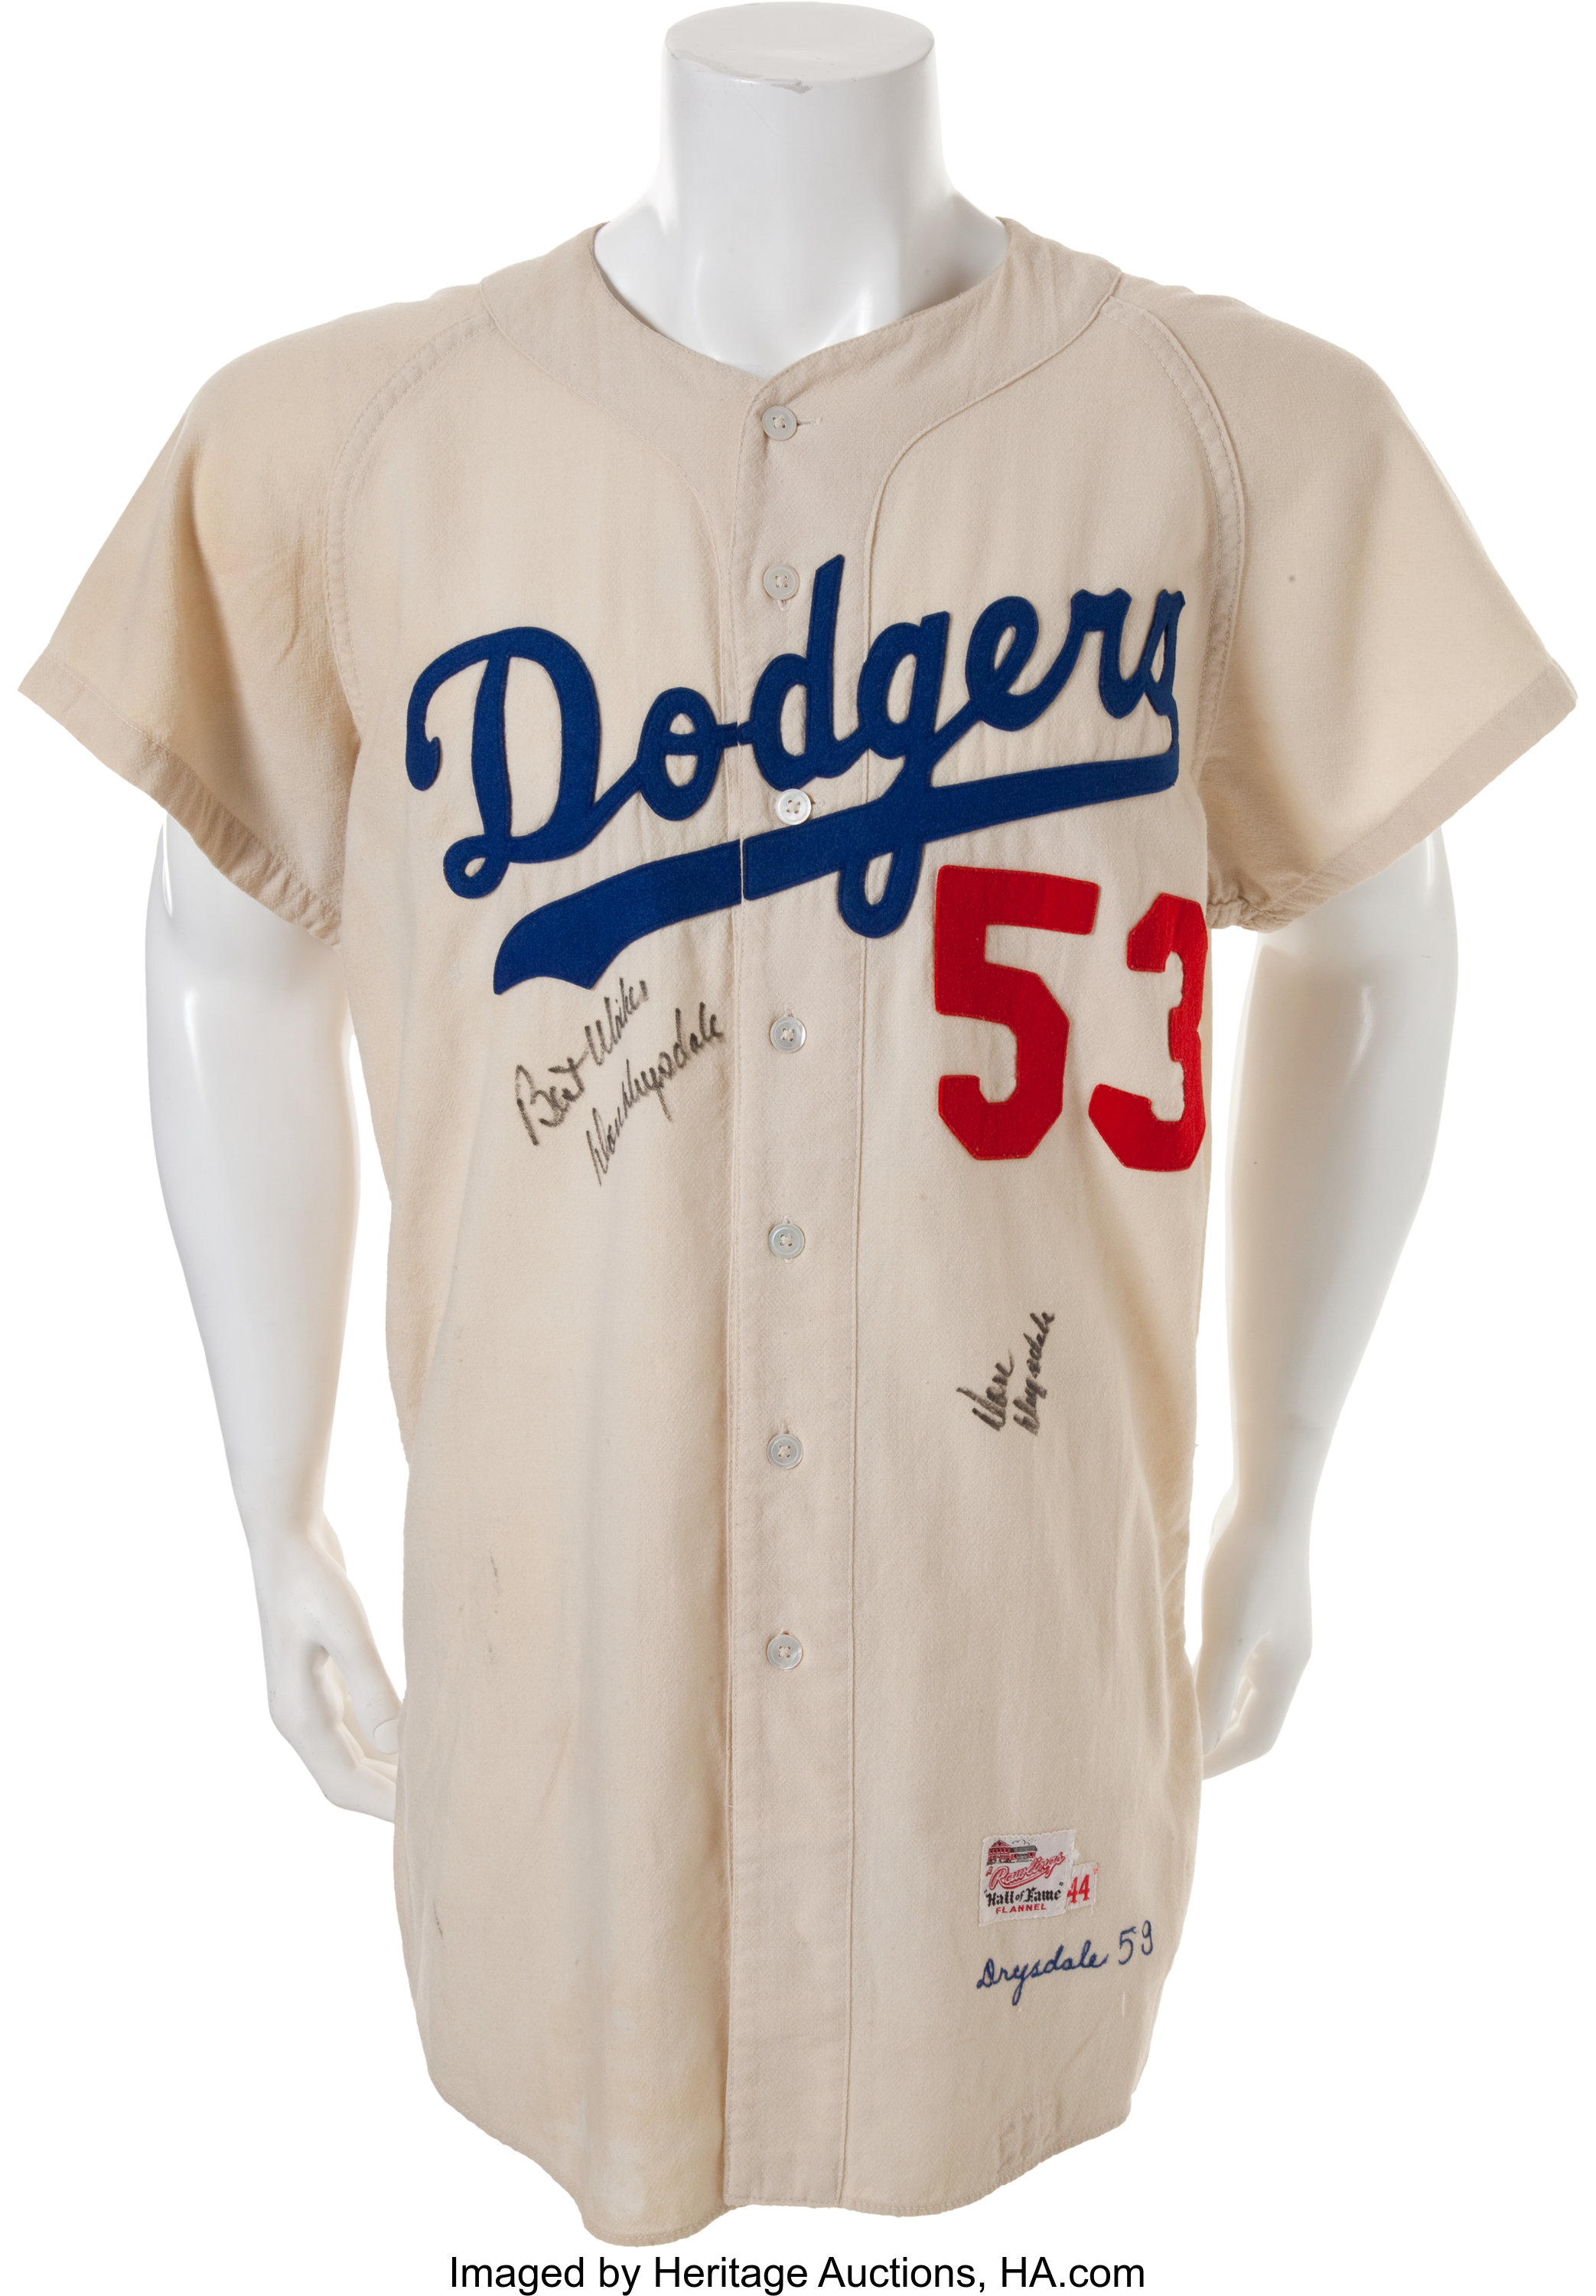 Classic Los Angeles Dodgers Baseball Jersey As-is